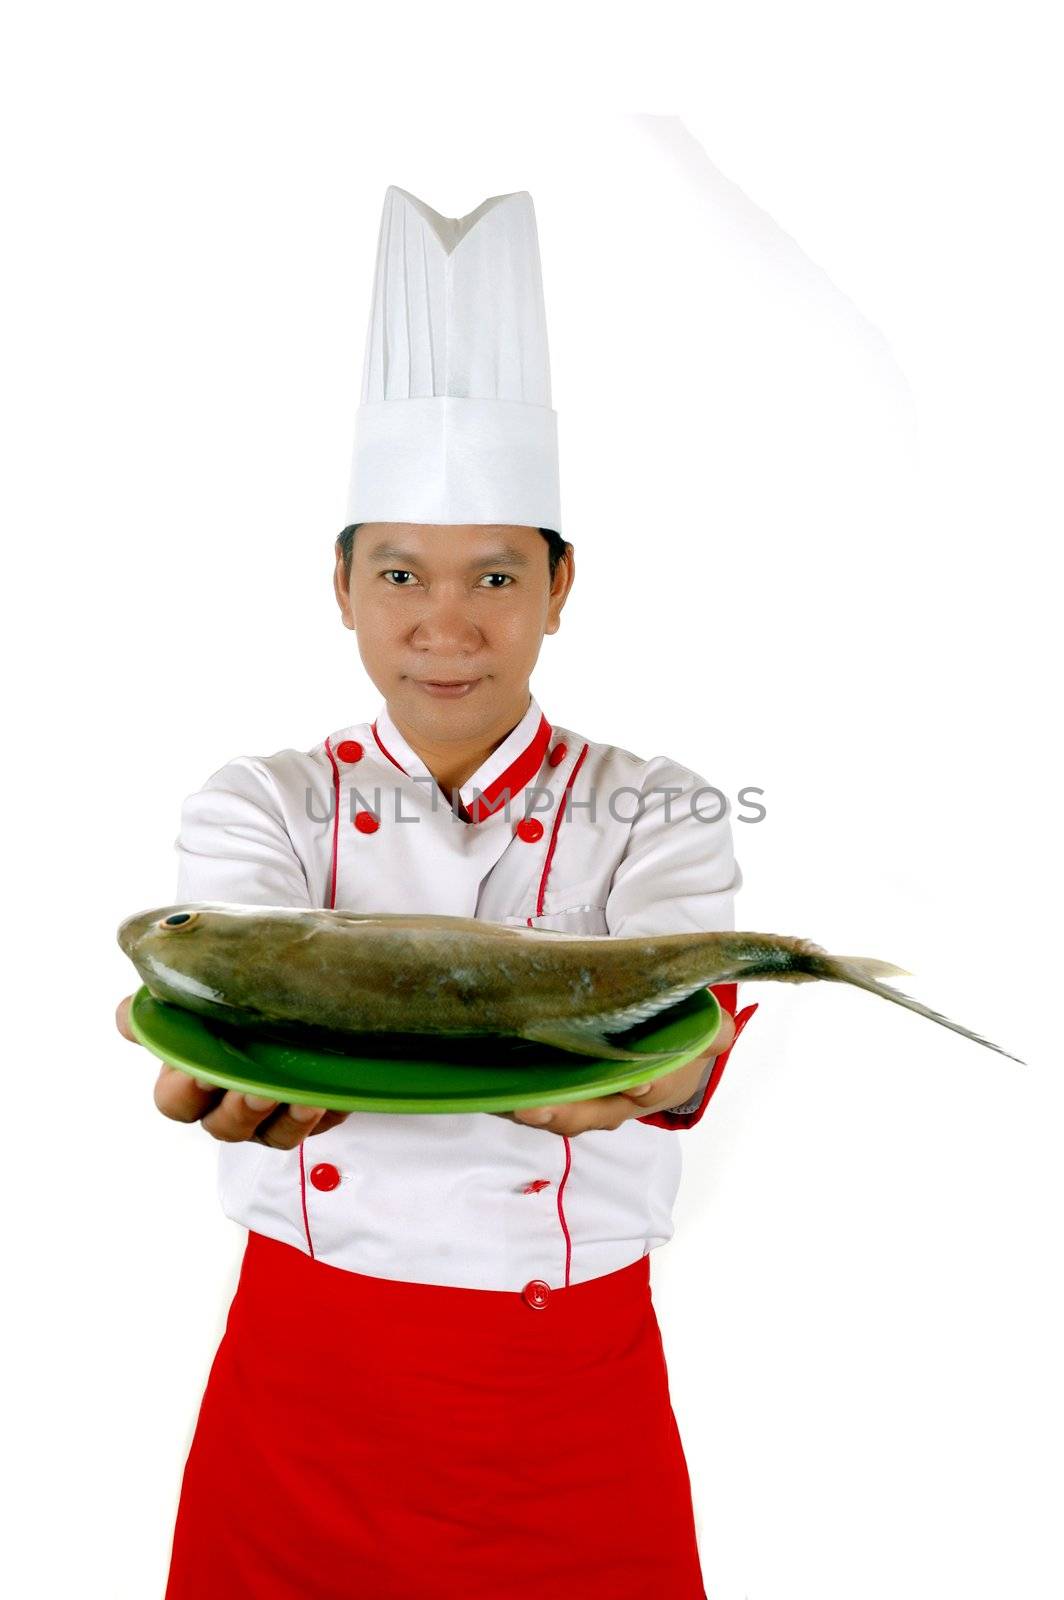 chef present raw fish on a green plate isolated on white background